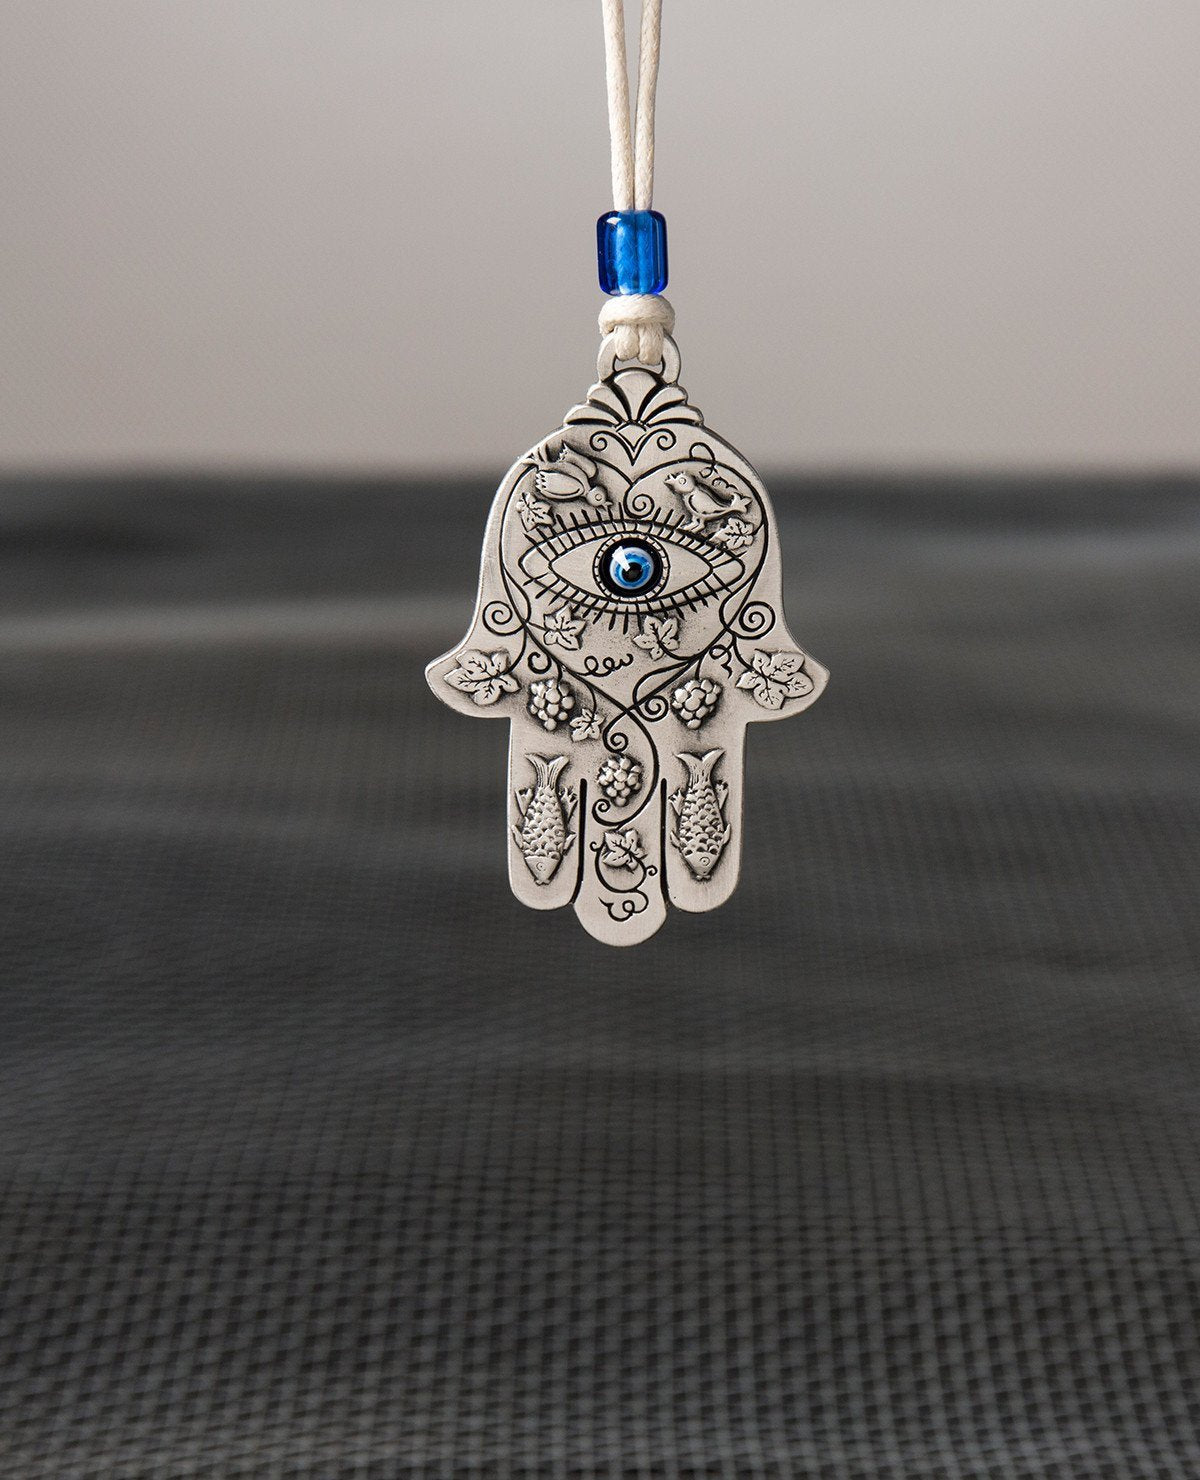 Sterling silver plated car pendant with a blue bead.  Length: 7 cm  Width: 4 cm